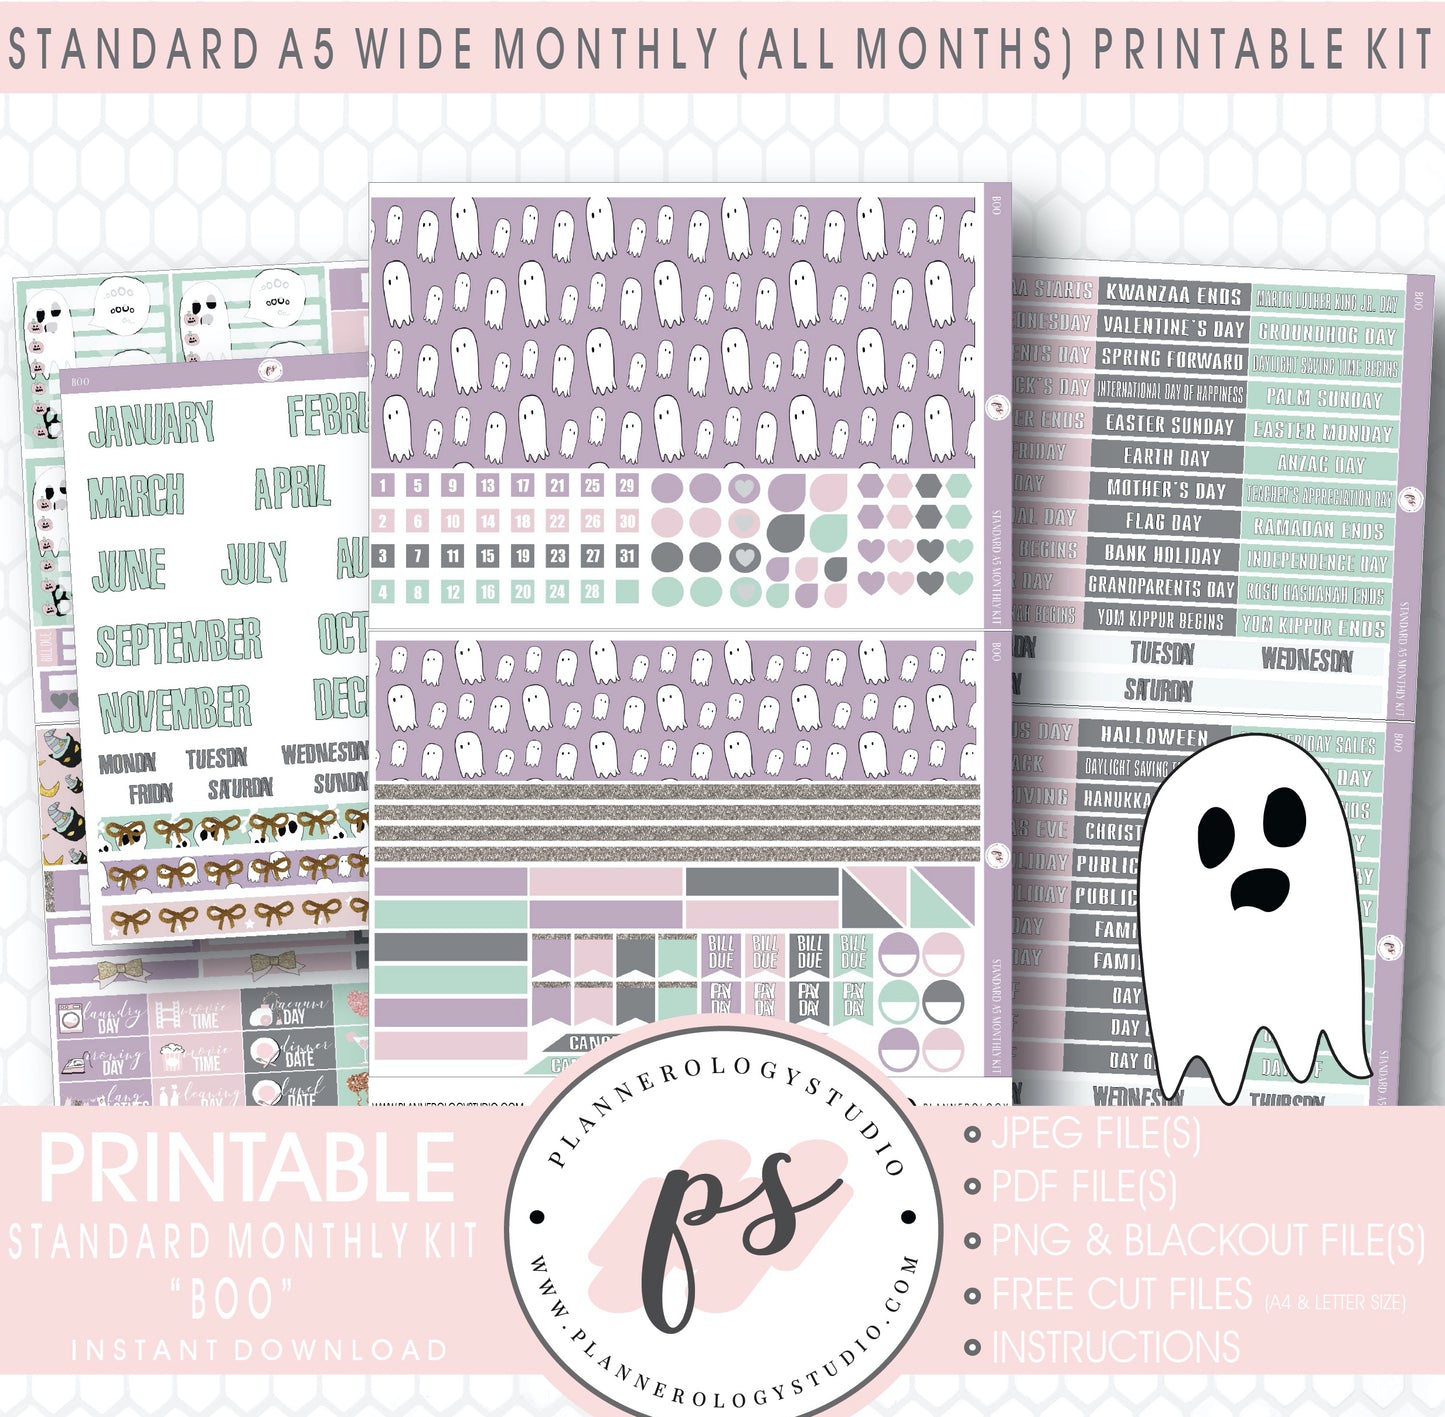 Boo Halloween Monthly Kit Digital Printable Planner Stickers (Undated All Months for Standard A5 Wide Planners)